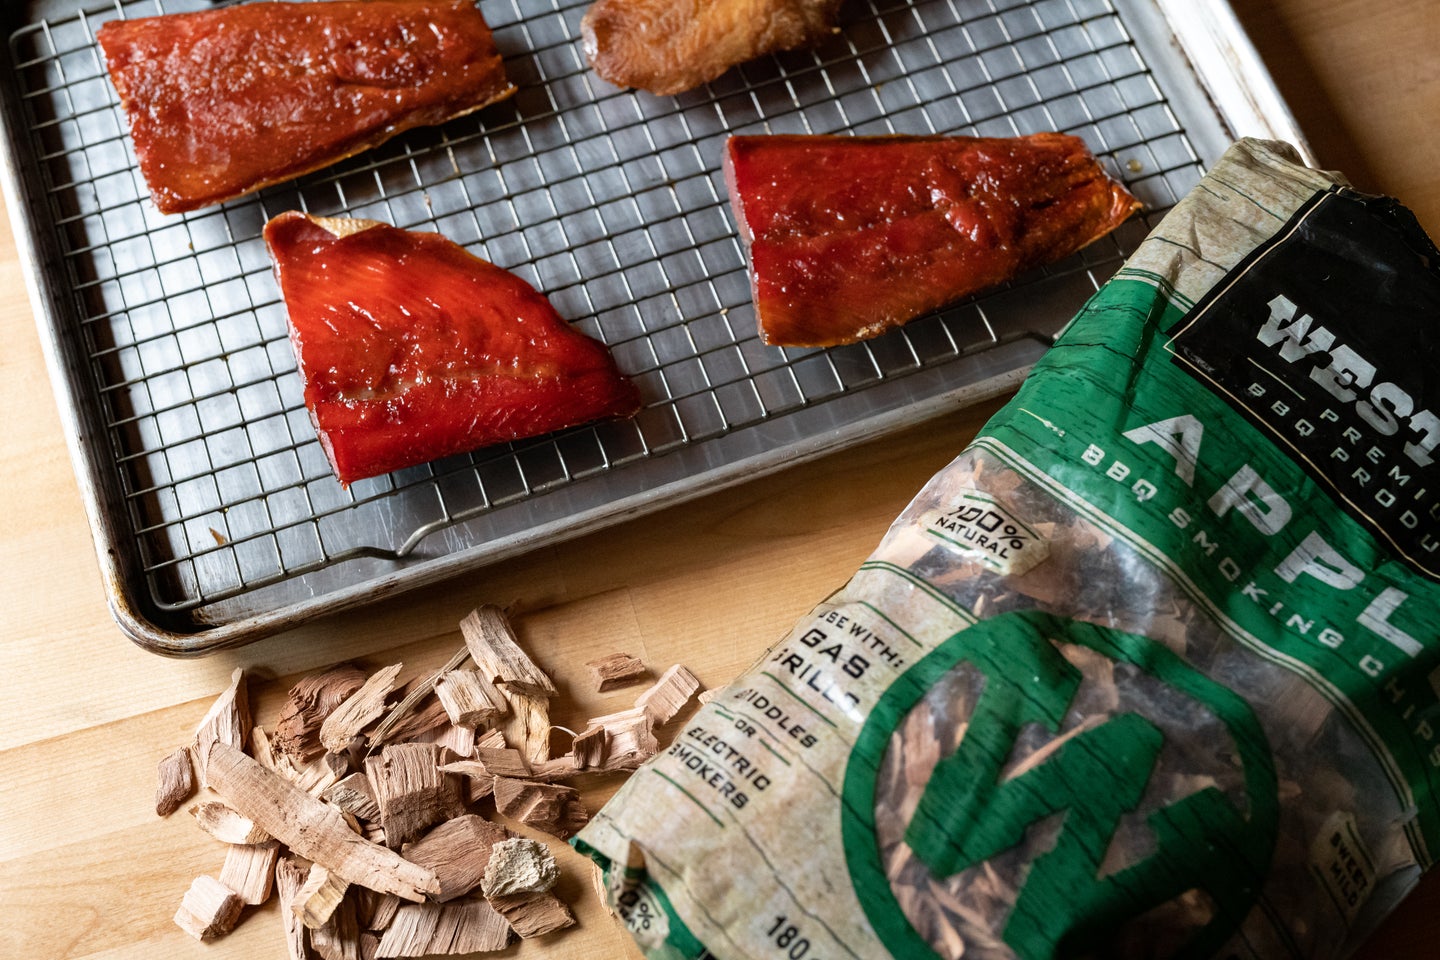 Smoke Wood for Salmon: Enhancing Flavor with the Right Wood